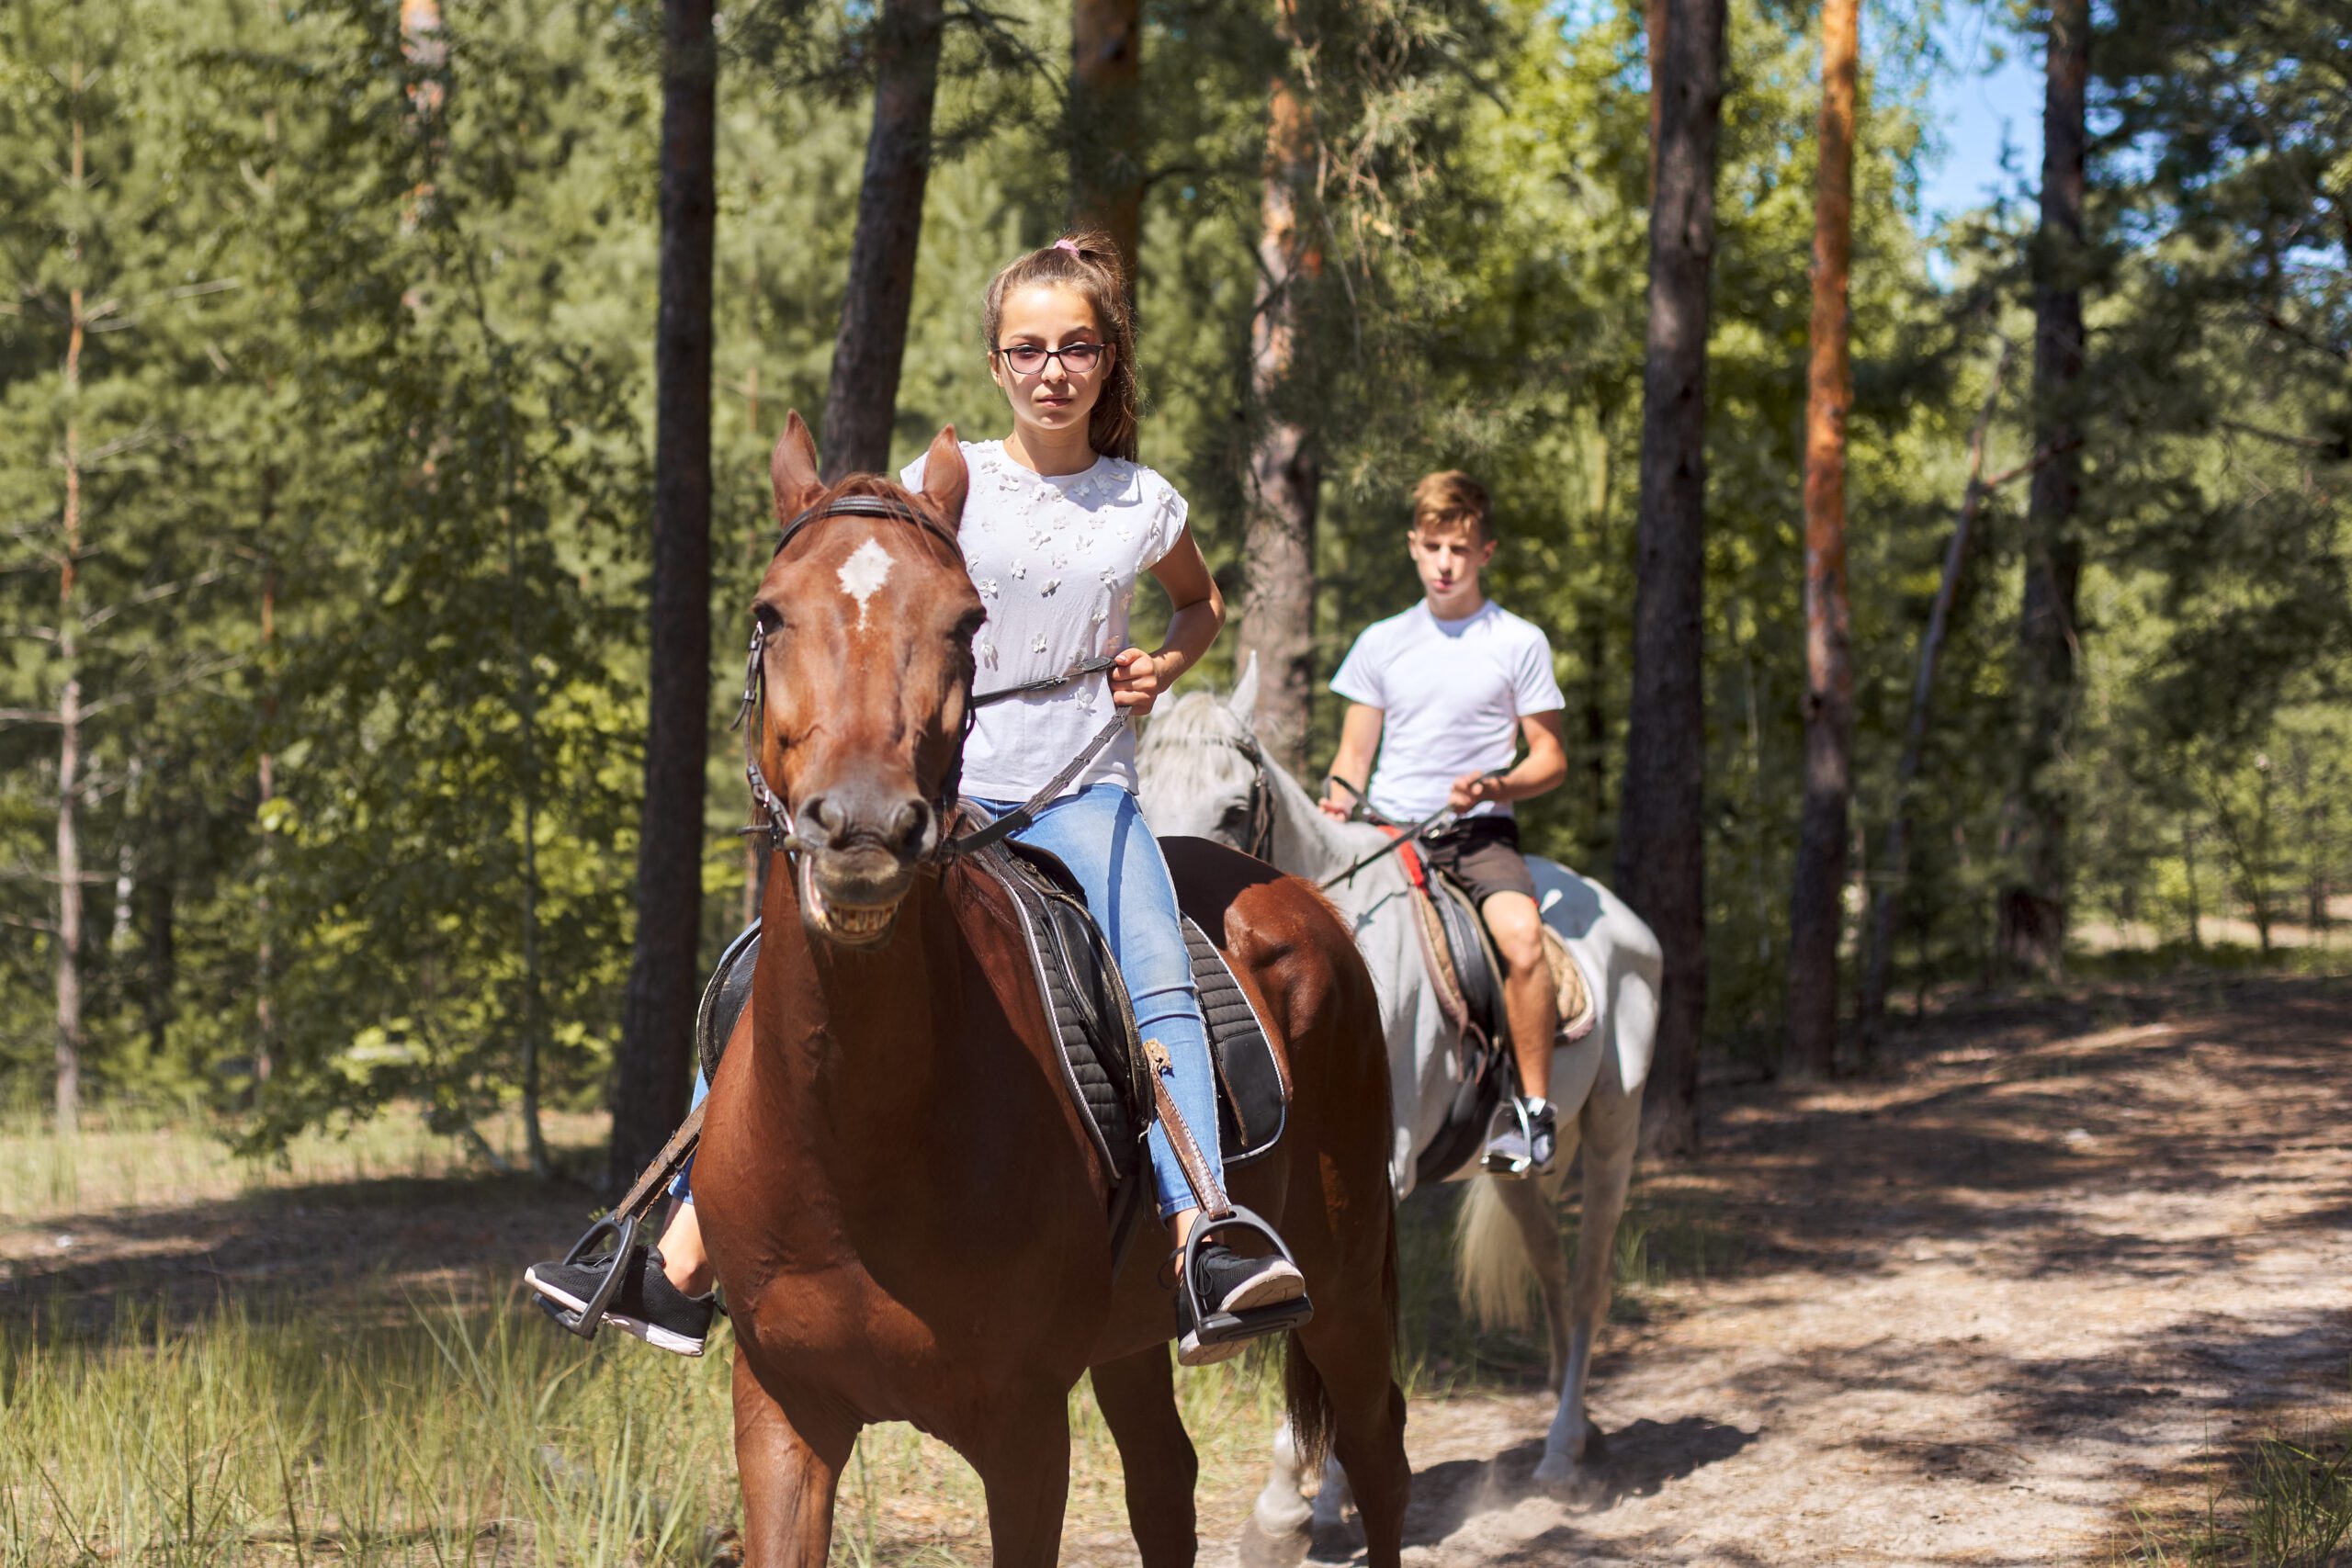 Group,Of,Teenagers,On,Horseback,Riding,In,Summer,Park.